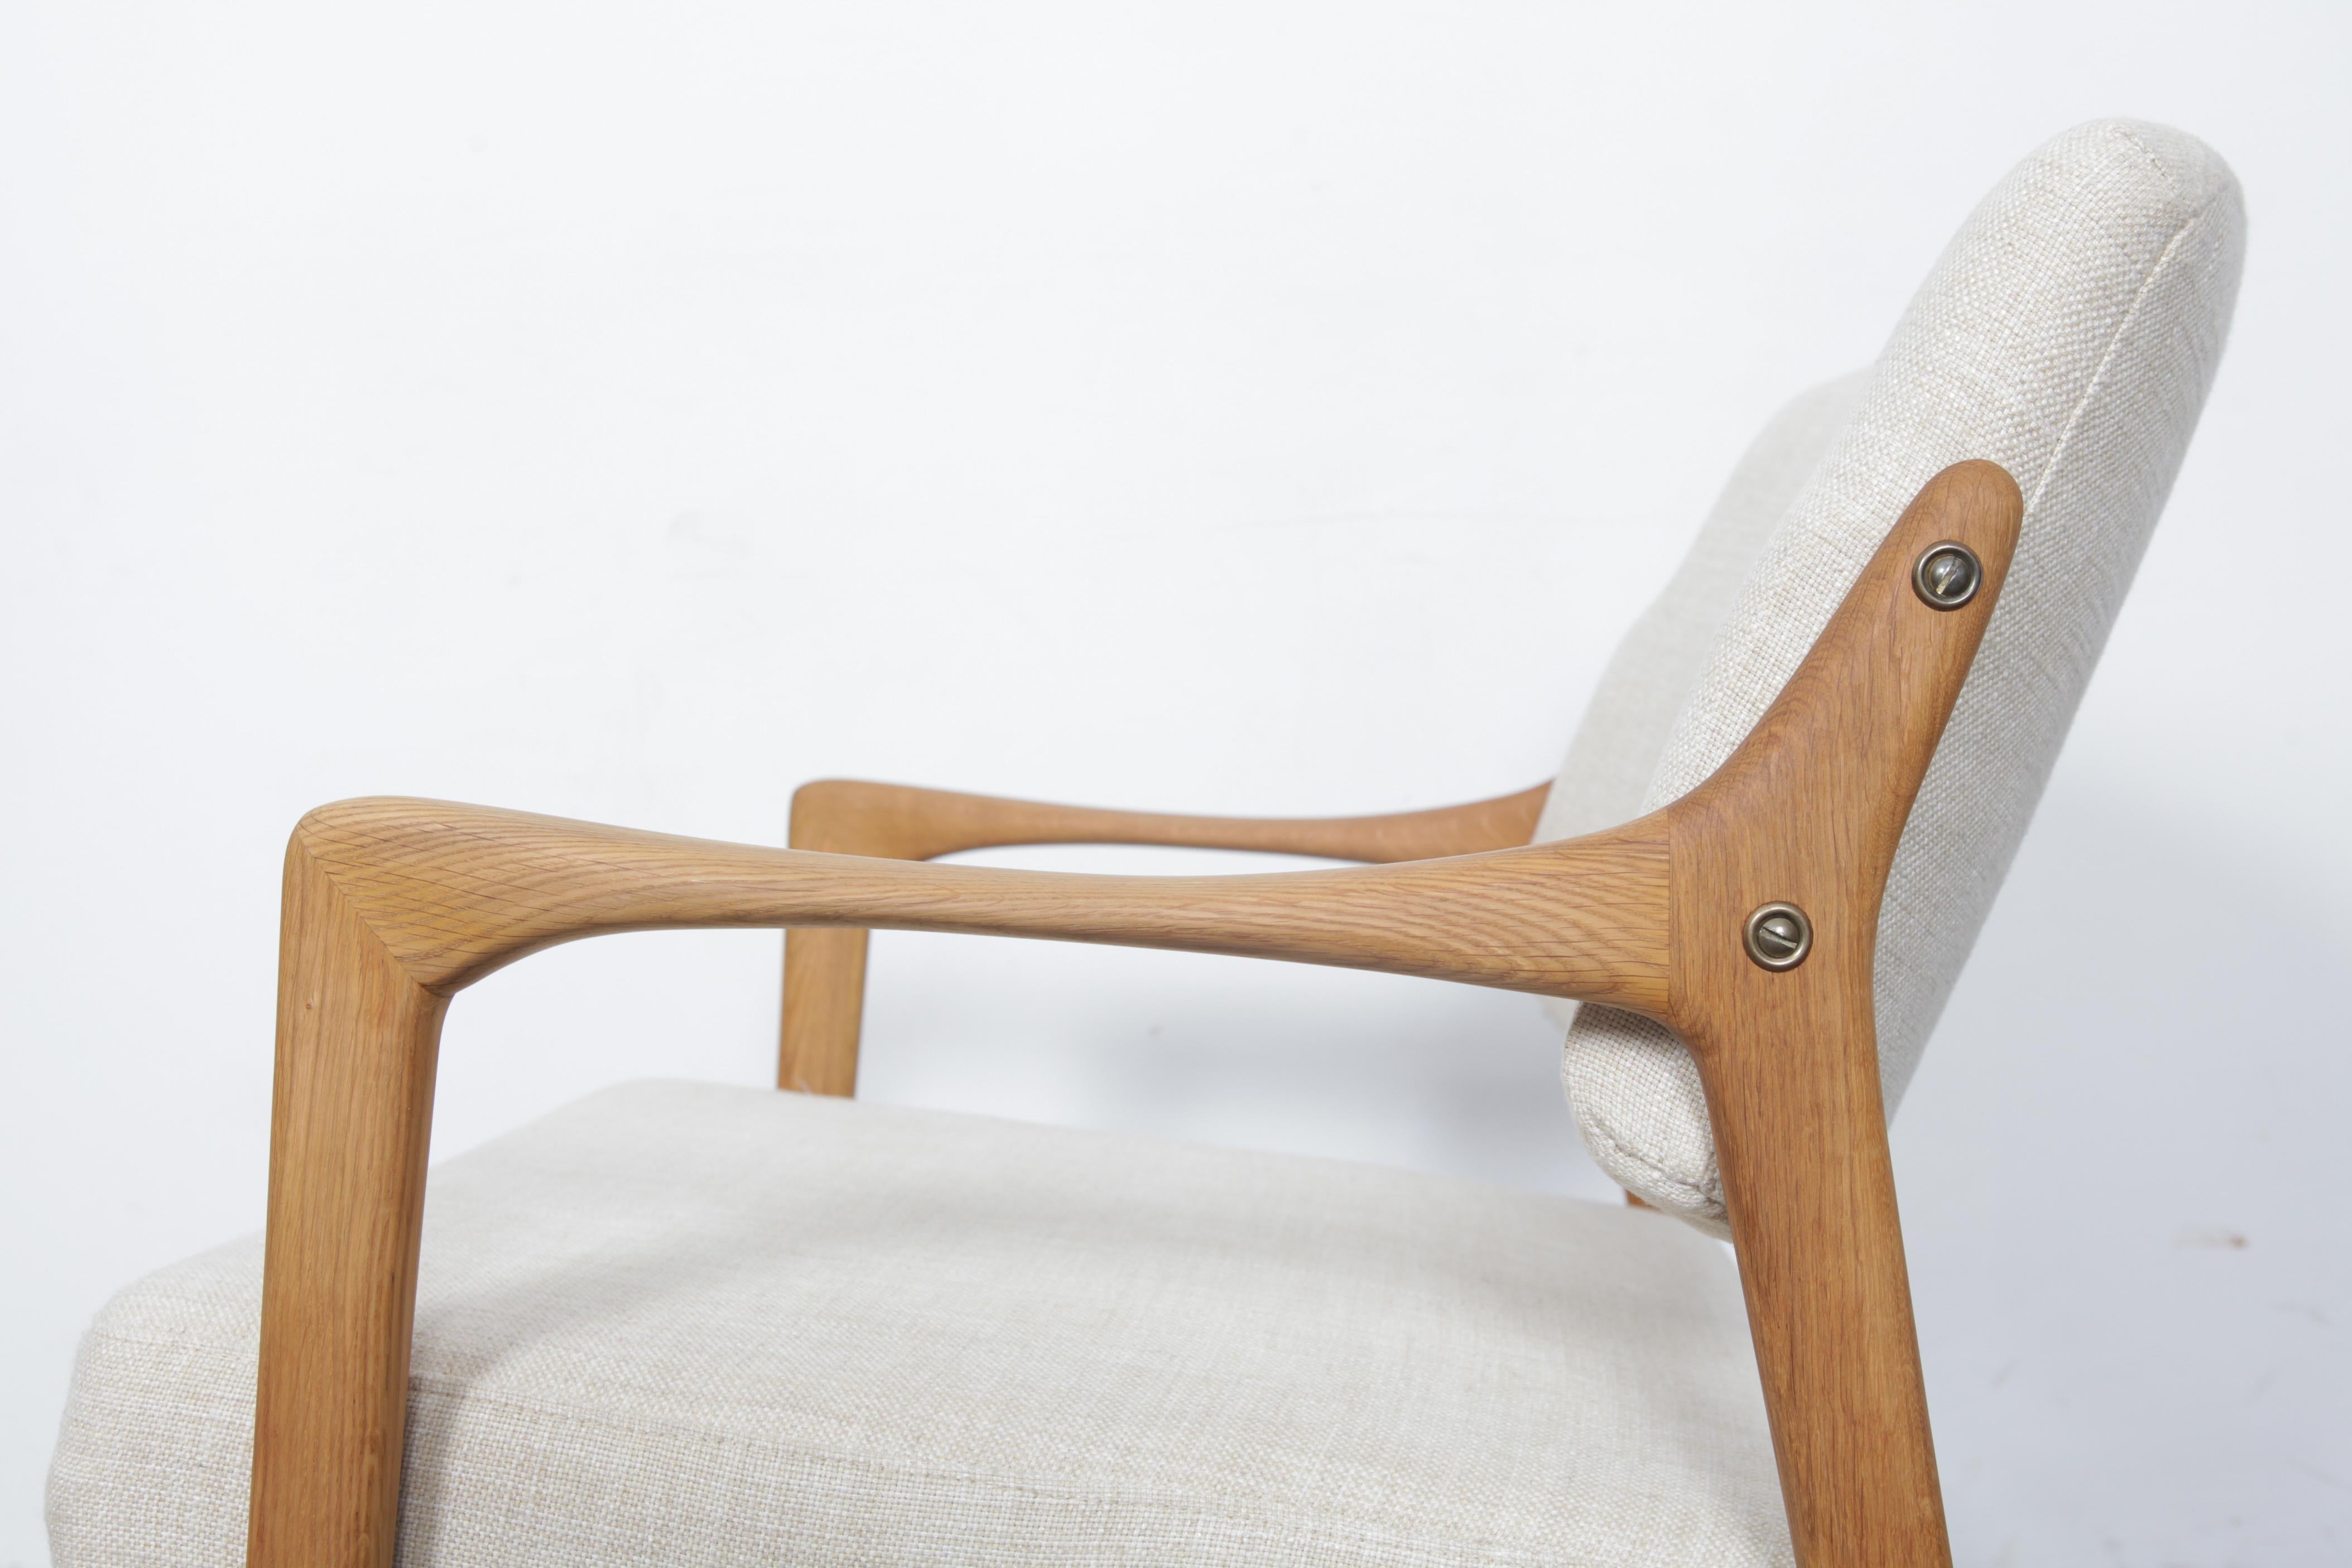 Pair of Swedish Solid Oak Chairs by Inge Andersson for Bröderna Andersson 1